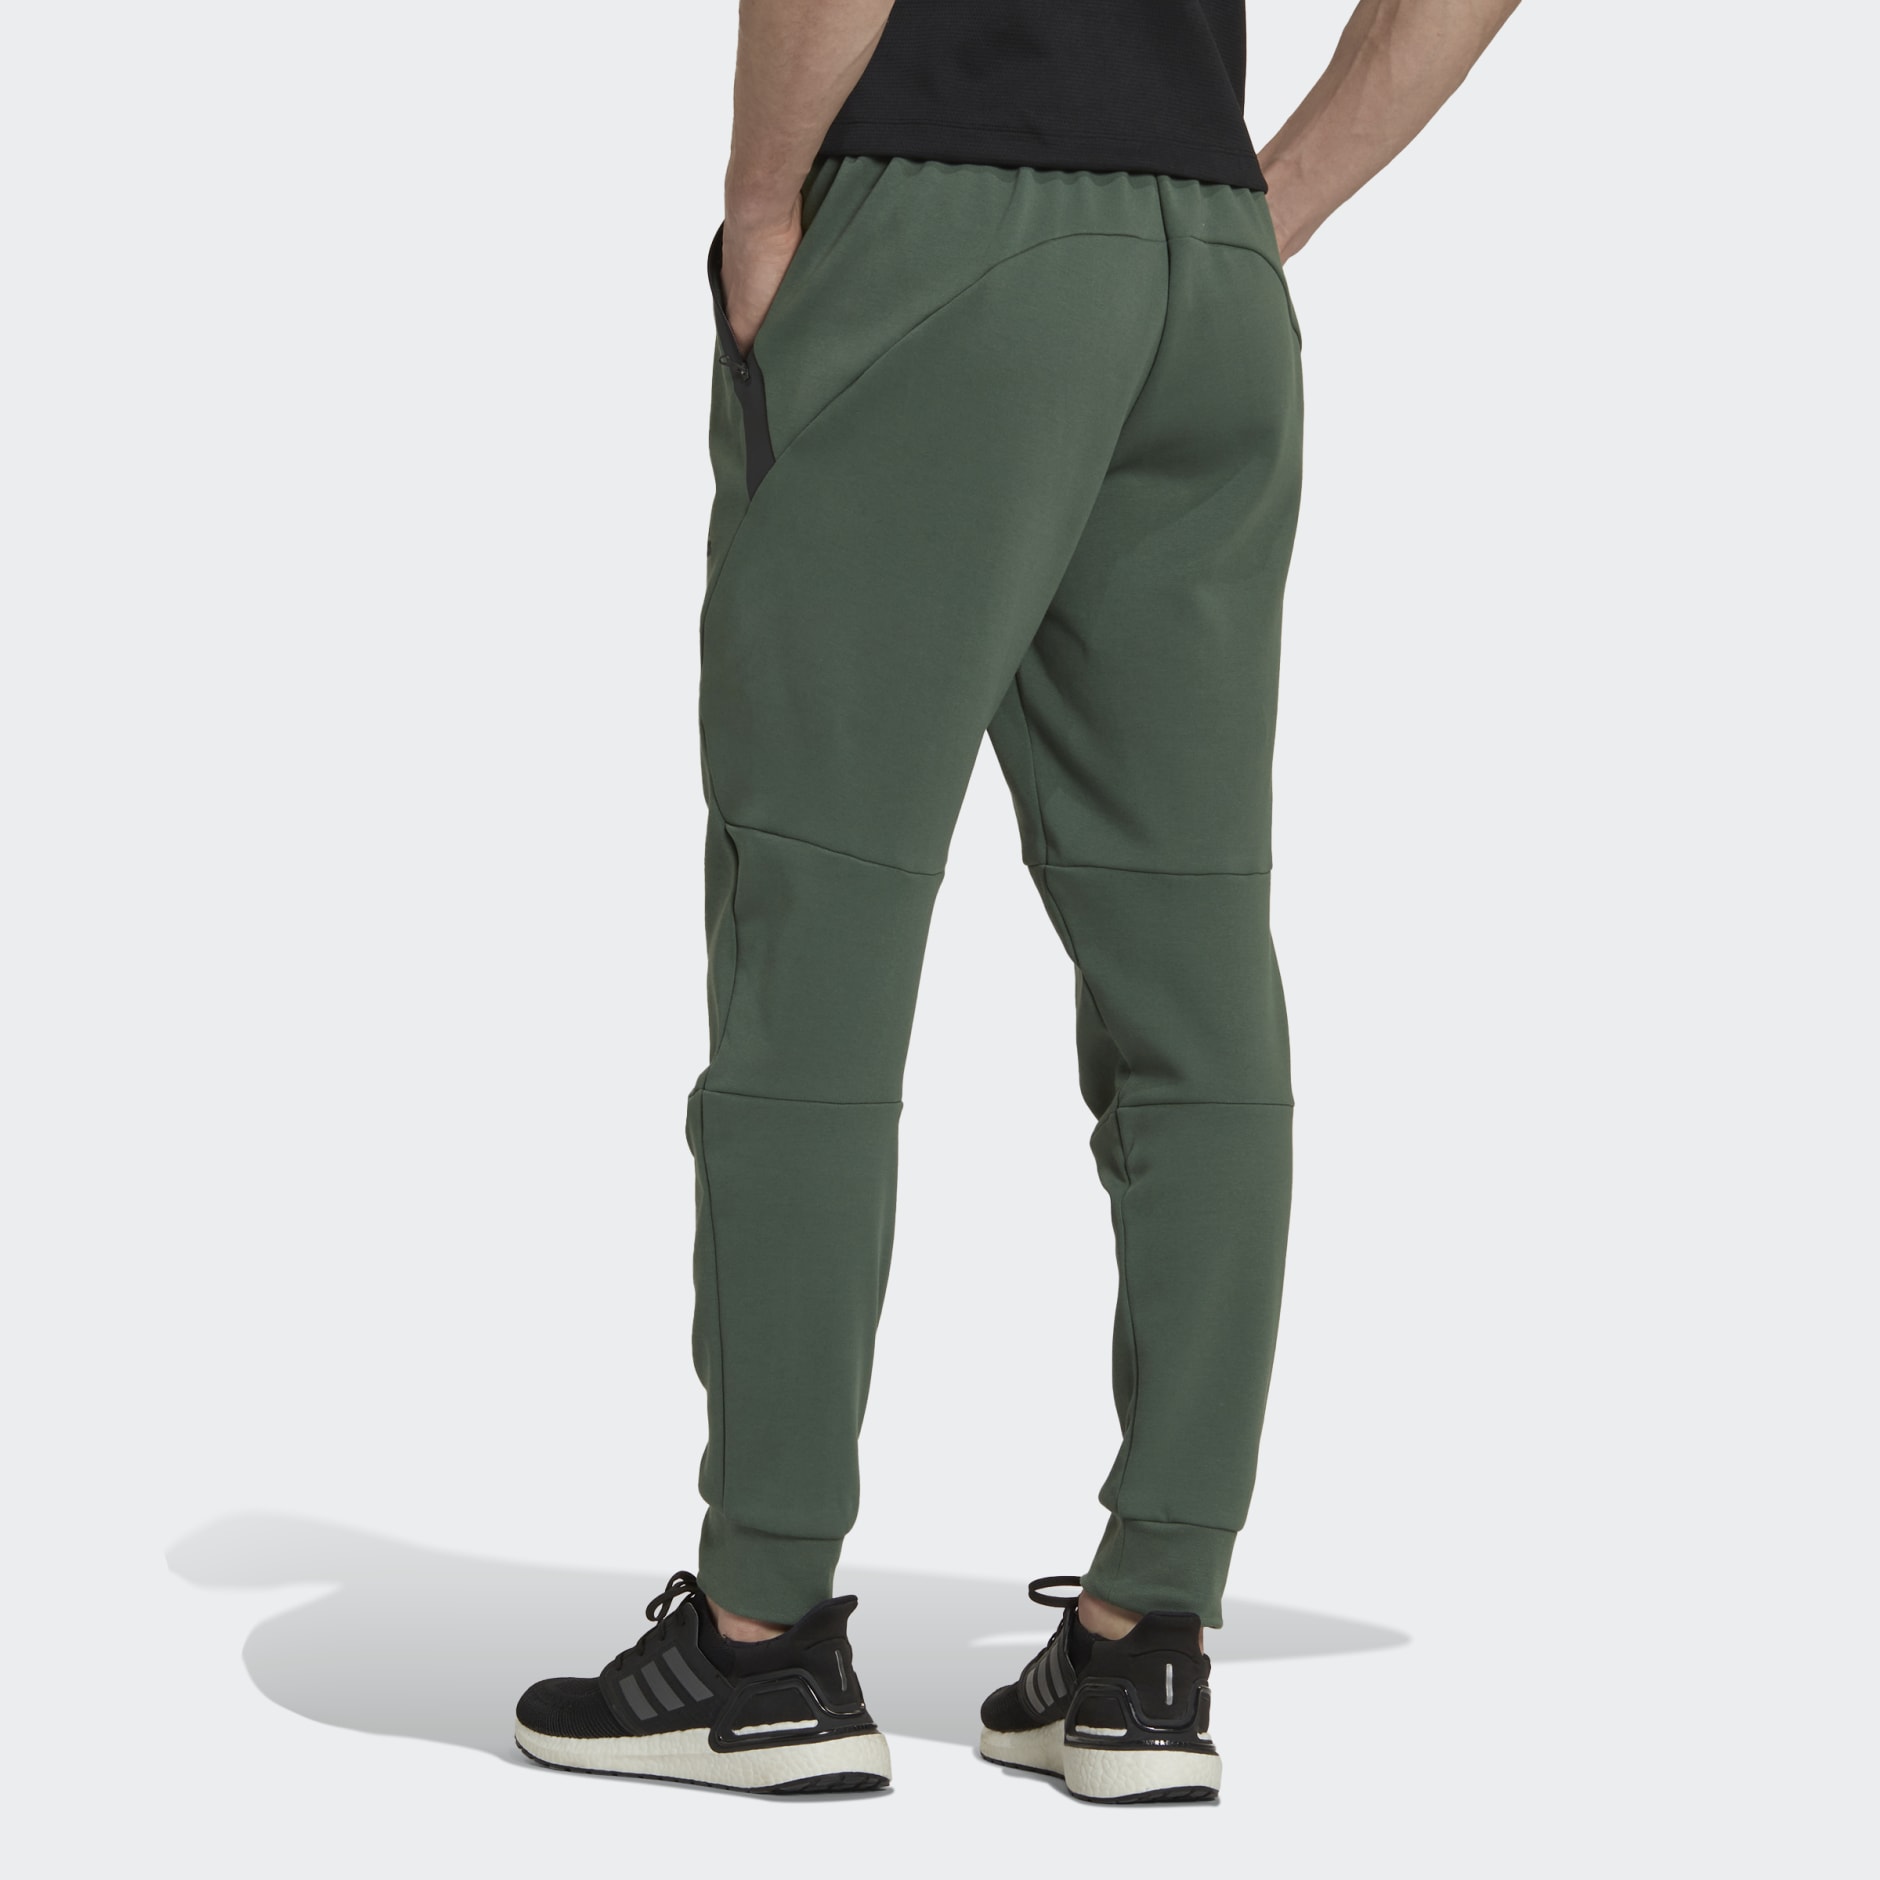 Oxide Trouser, Suited For Anything